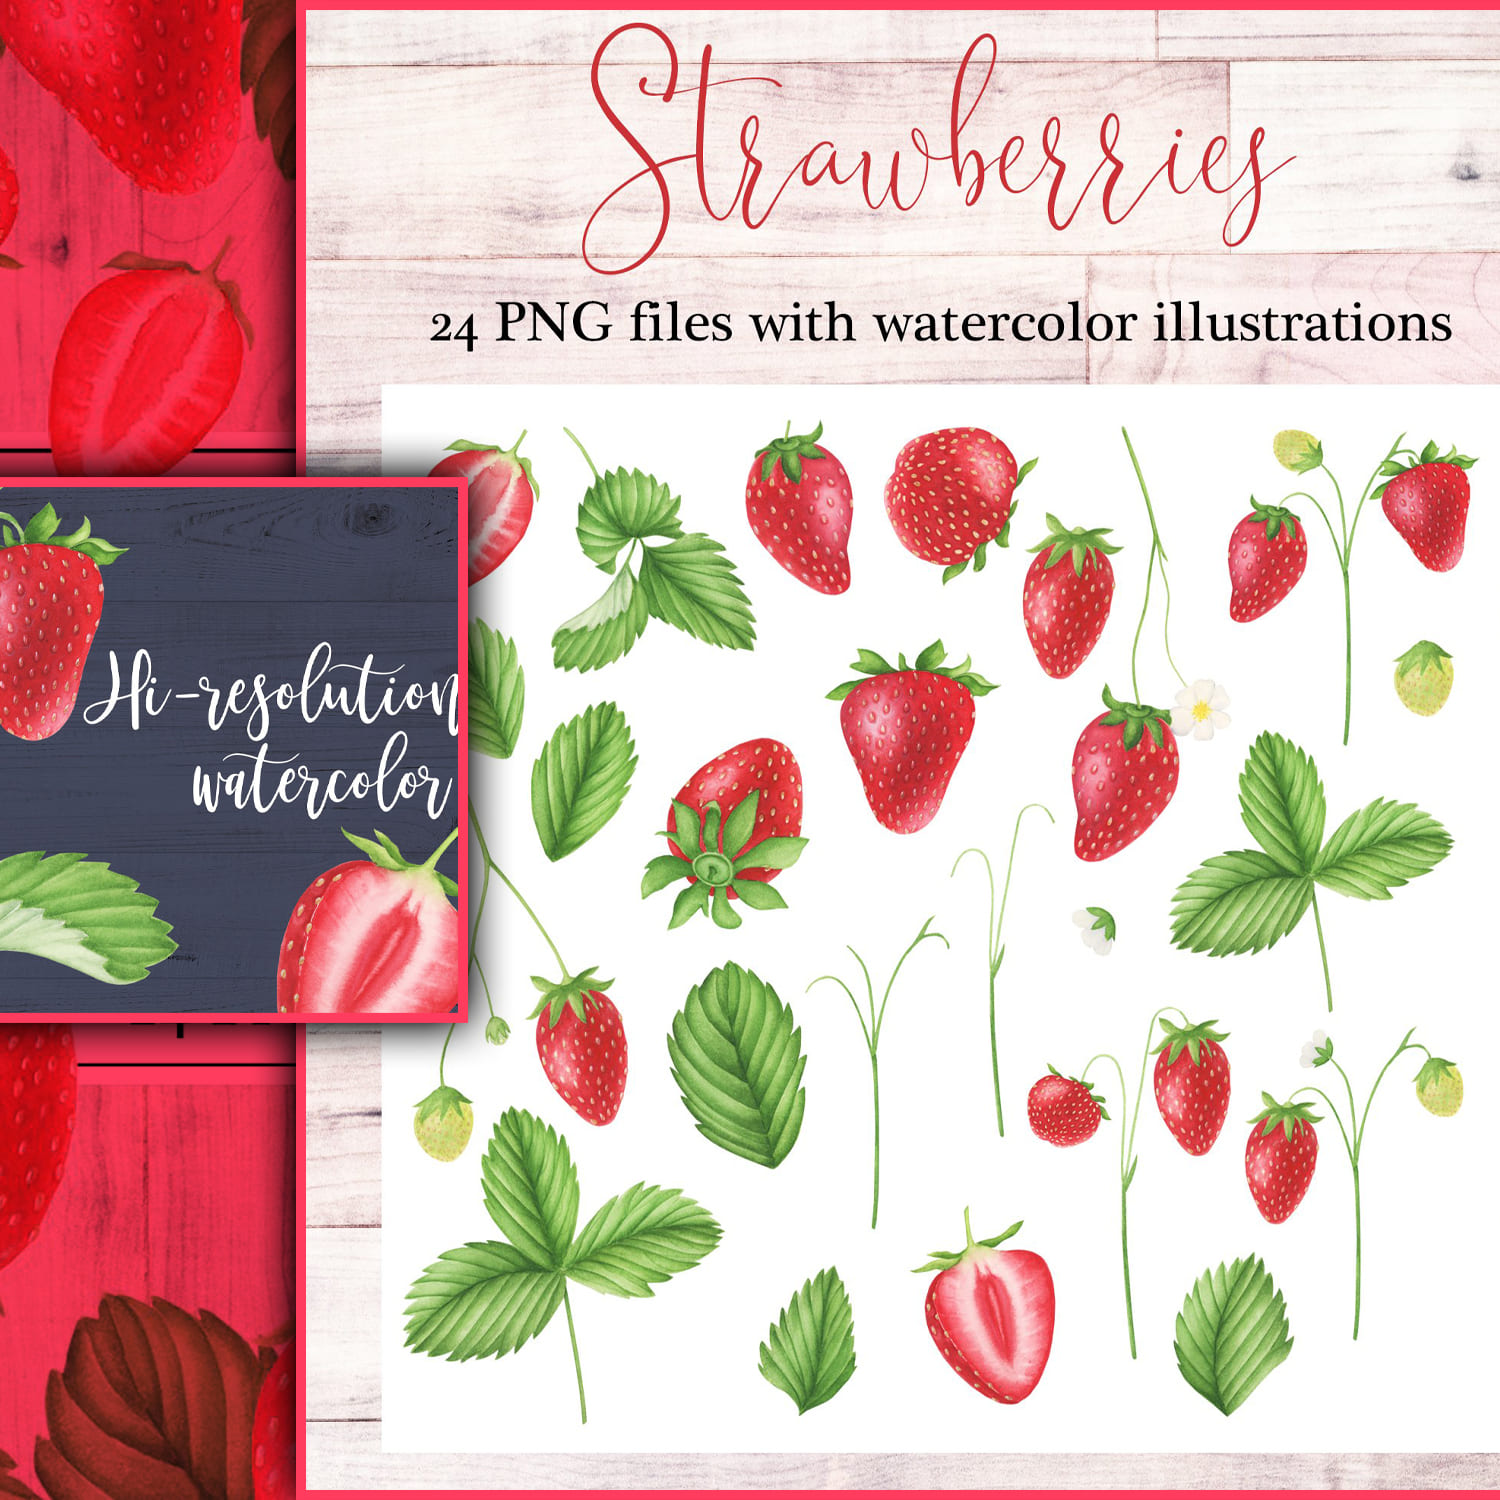 Strawberries watercolor clipart cover.